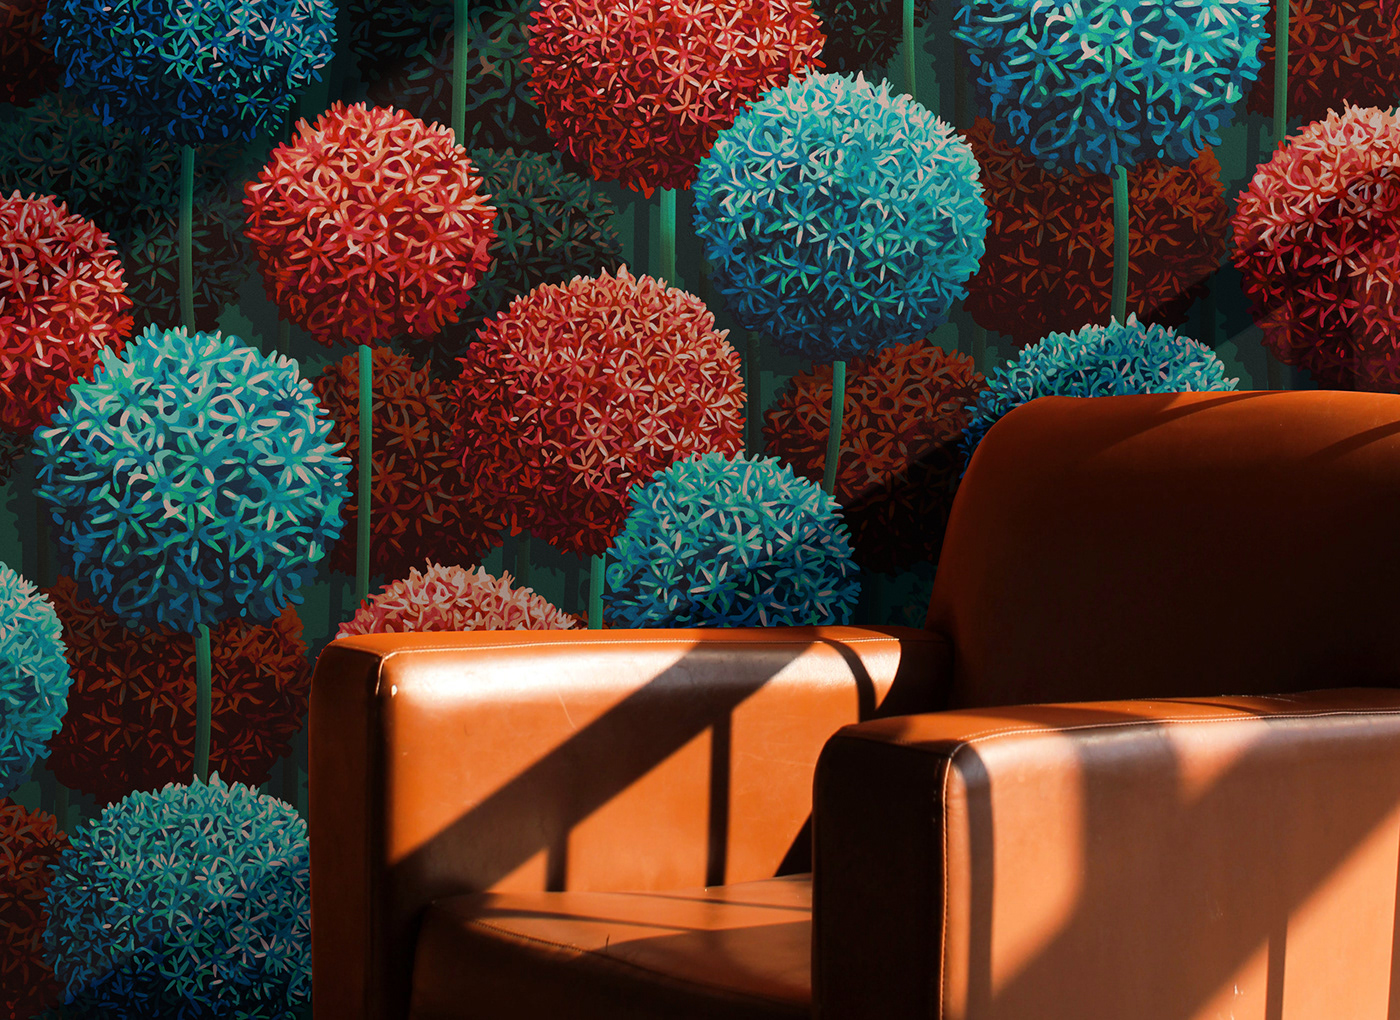 Photograph of a hand-painted allium wallpaper in a red and blue colourway.